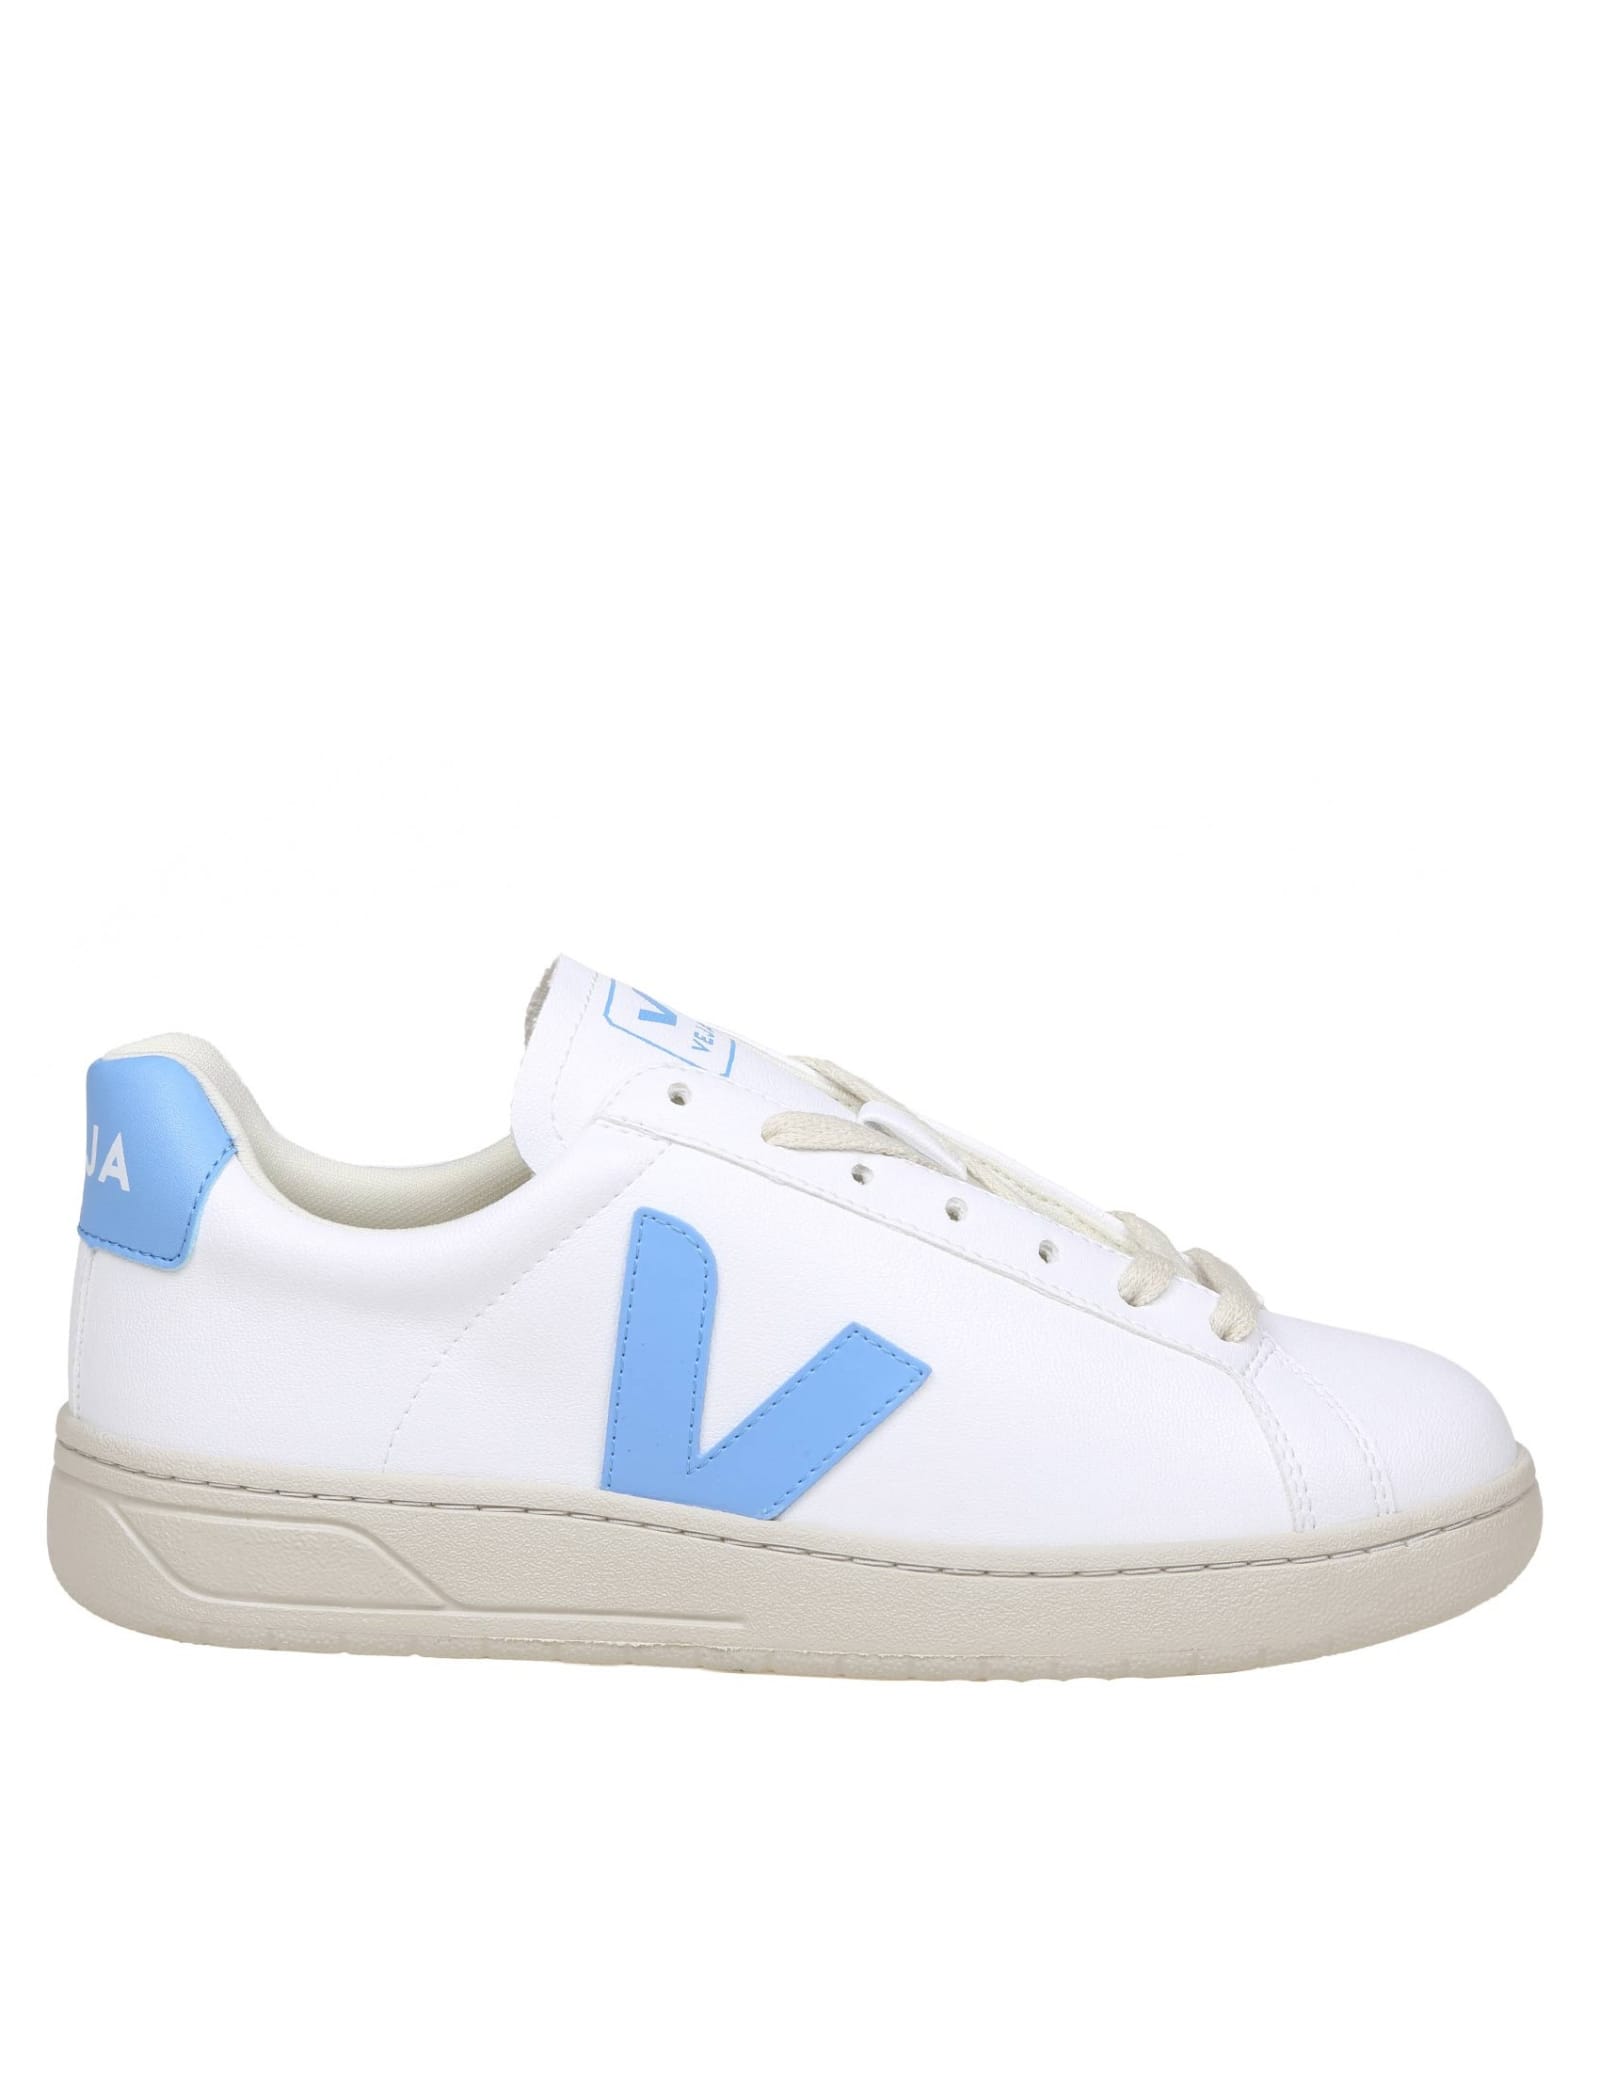 Shop Veja Urca Sneakers In White/light Blue Coated Cotton